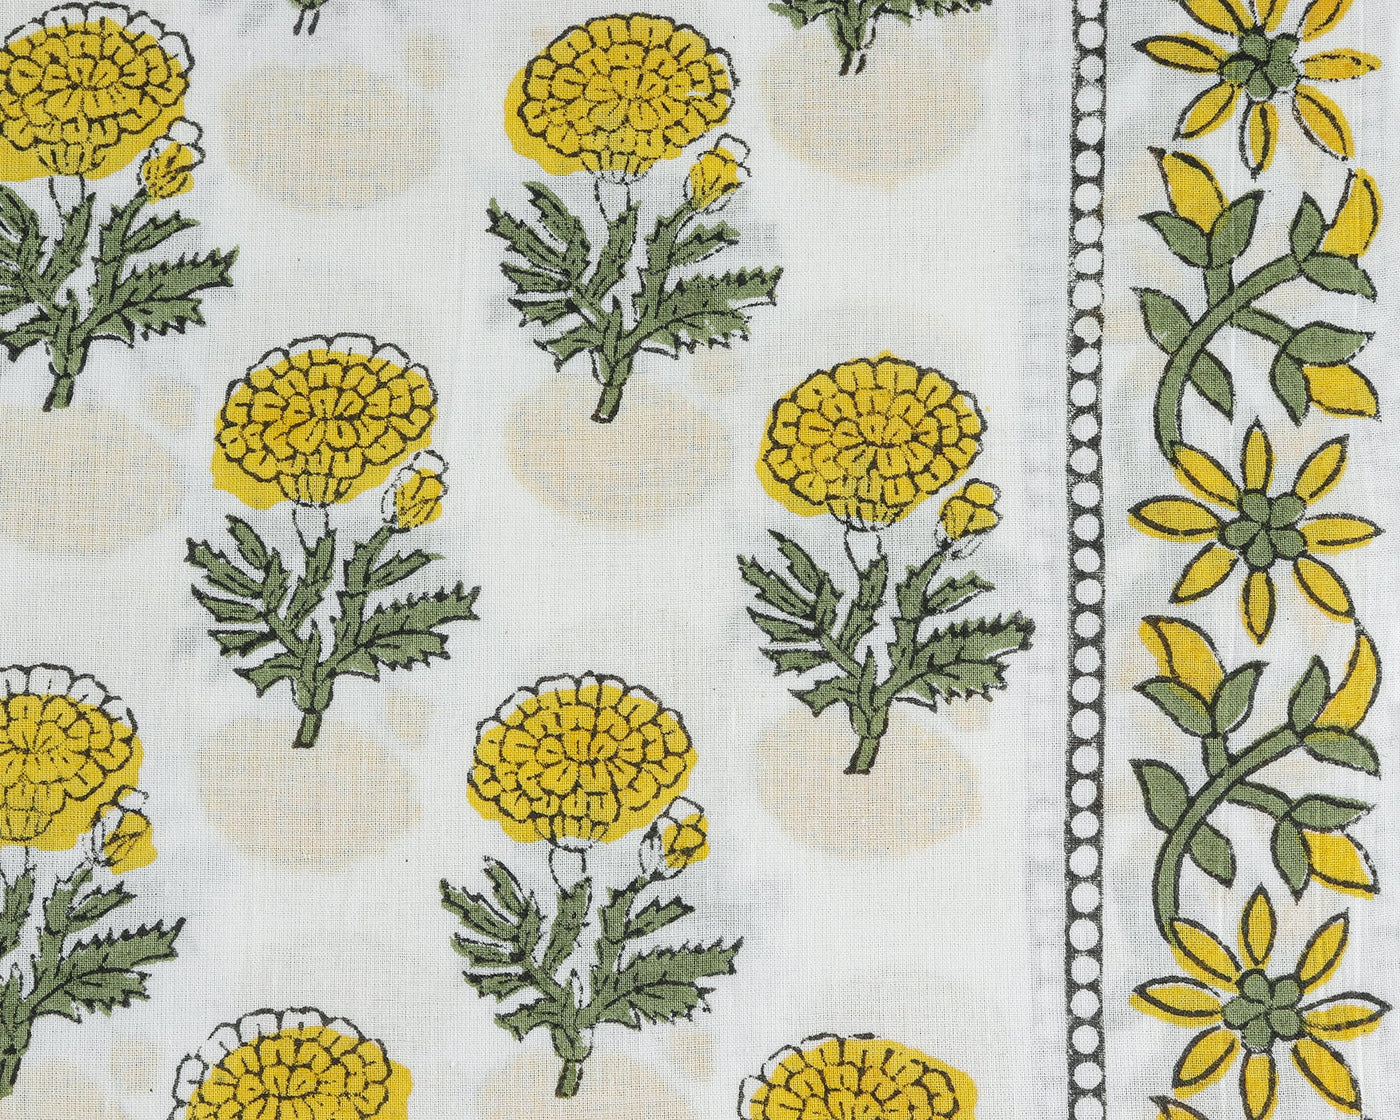 Bumblebee Yellow, Marigold Flower Indian Floral Hand Block Print 100% Pure Cotton Cloth, Fabric by the yard, Women's clothing Wedding Decor